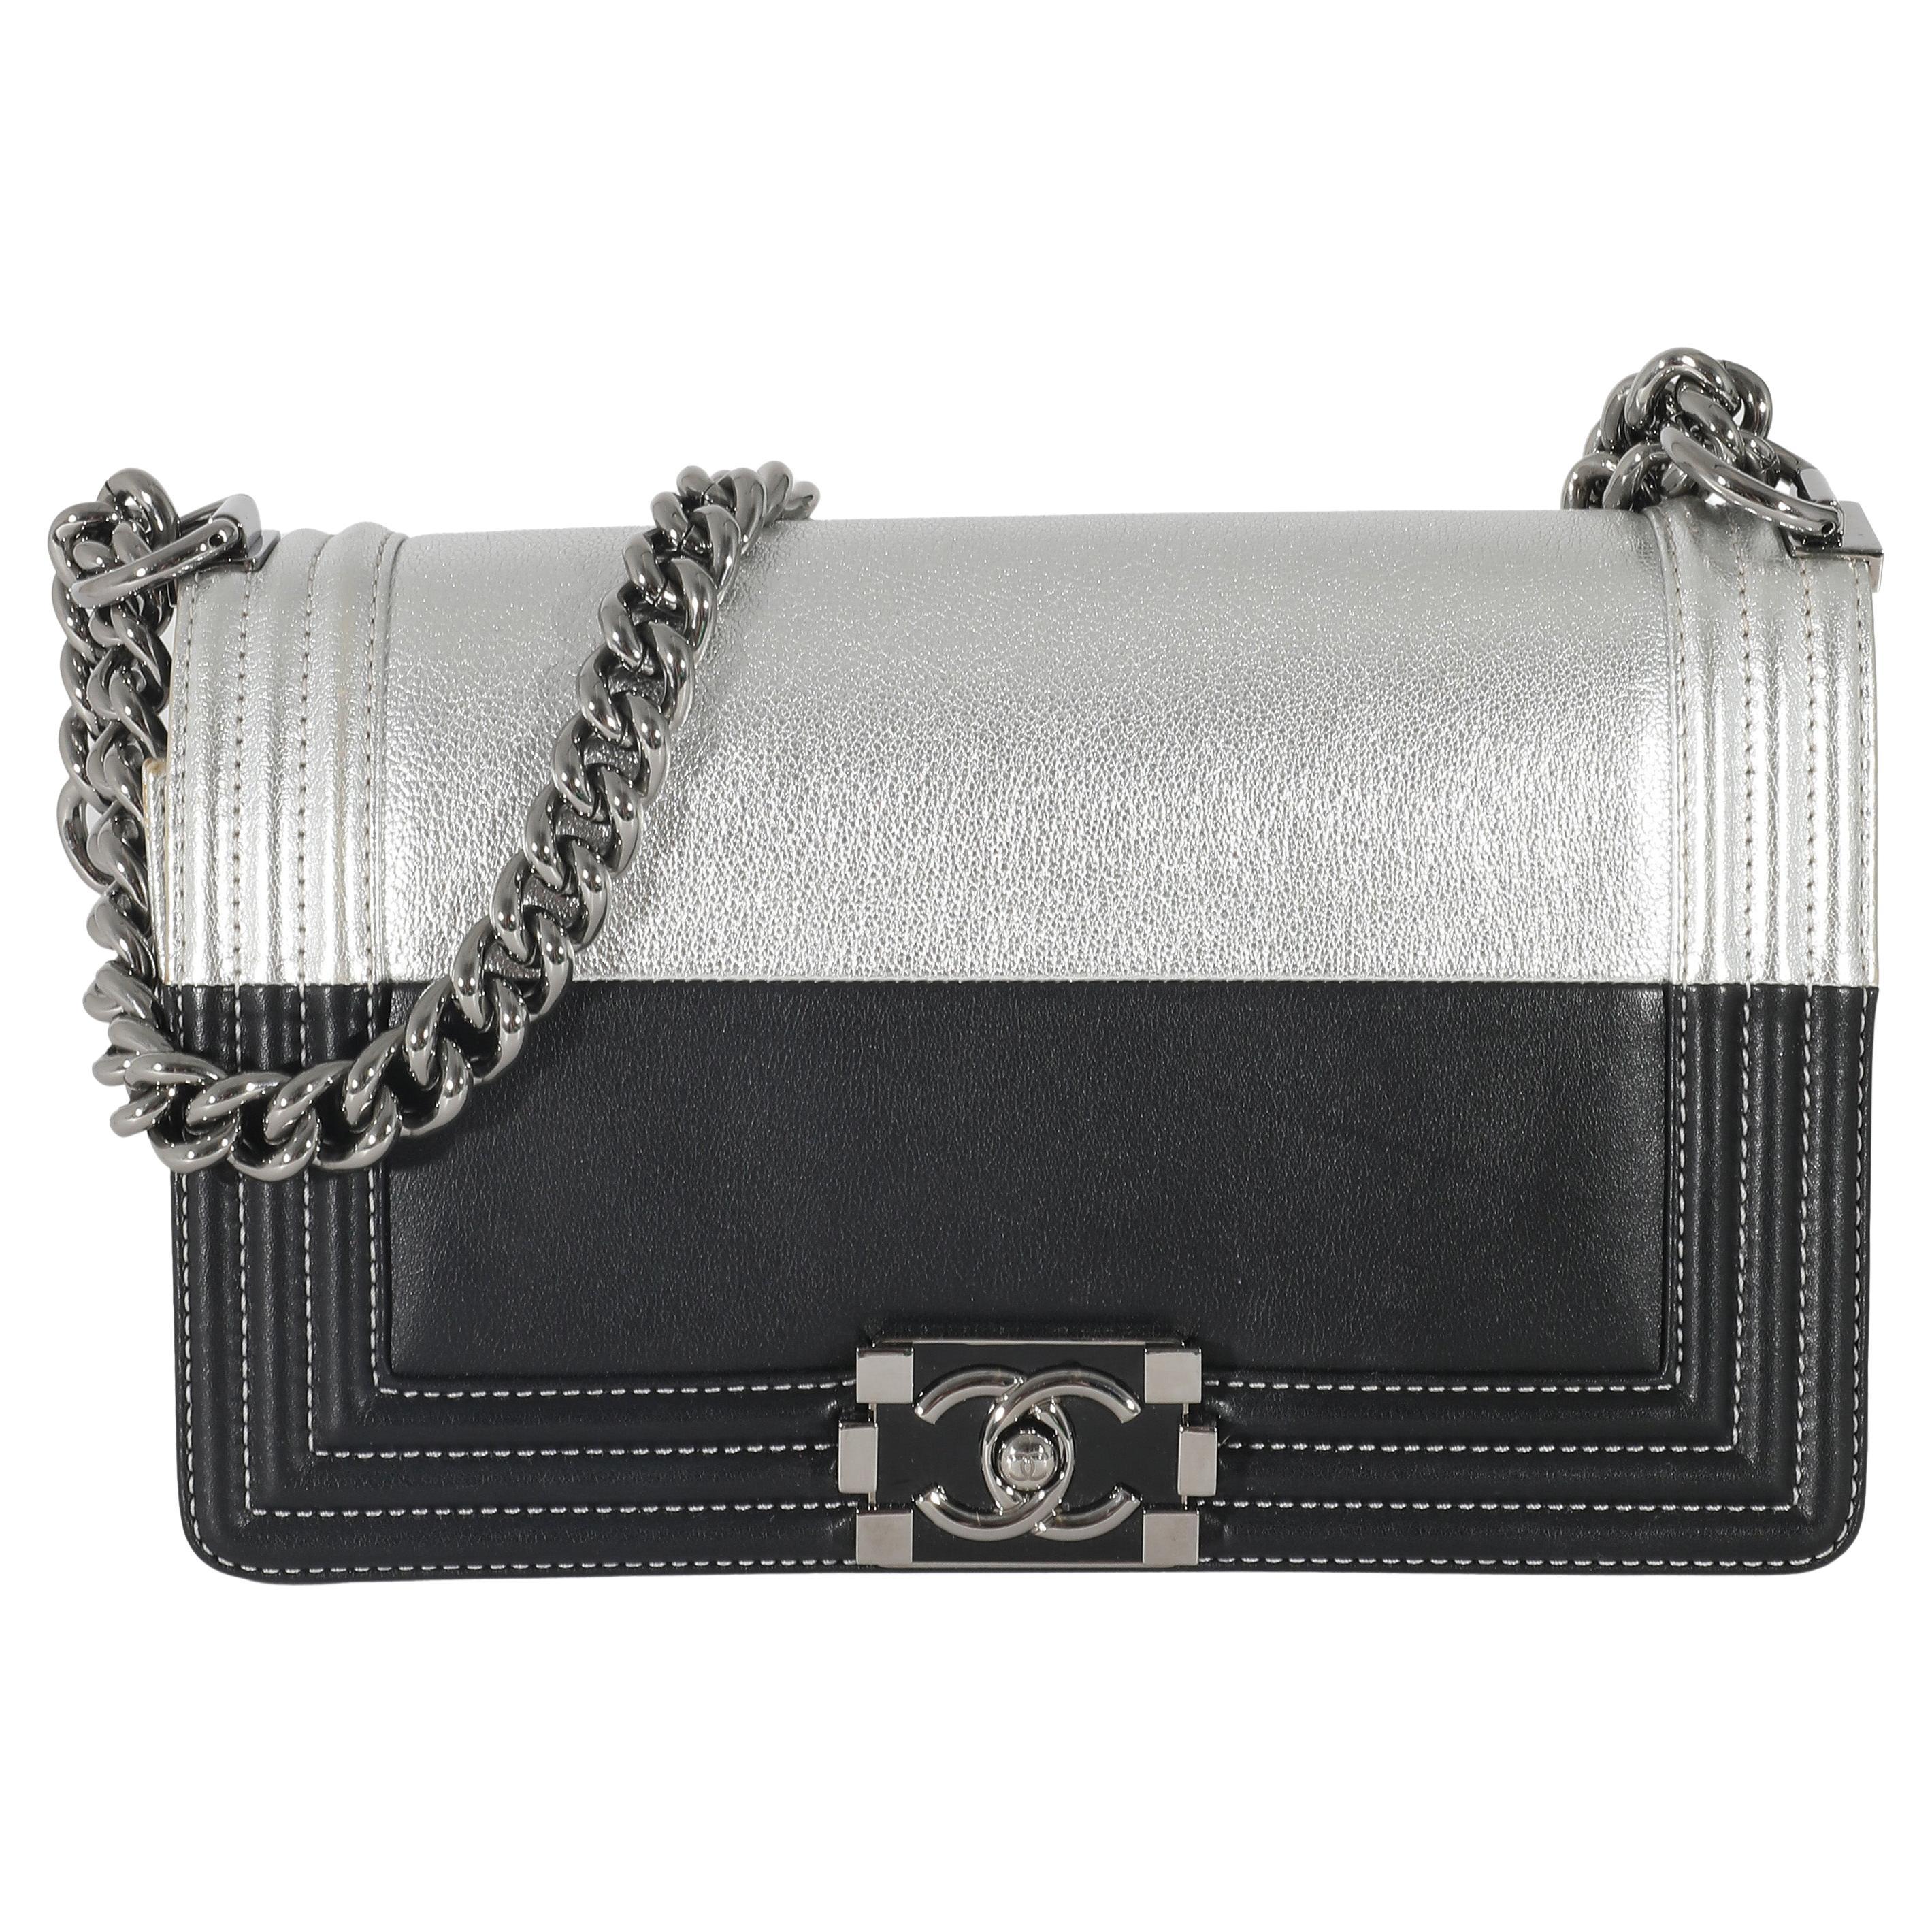 Chanel Black and Metallic Silver Leather Medium Boy Bag For Sale